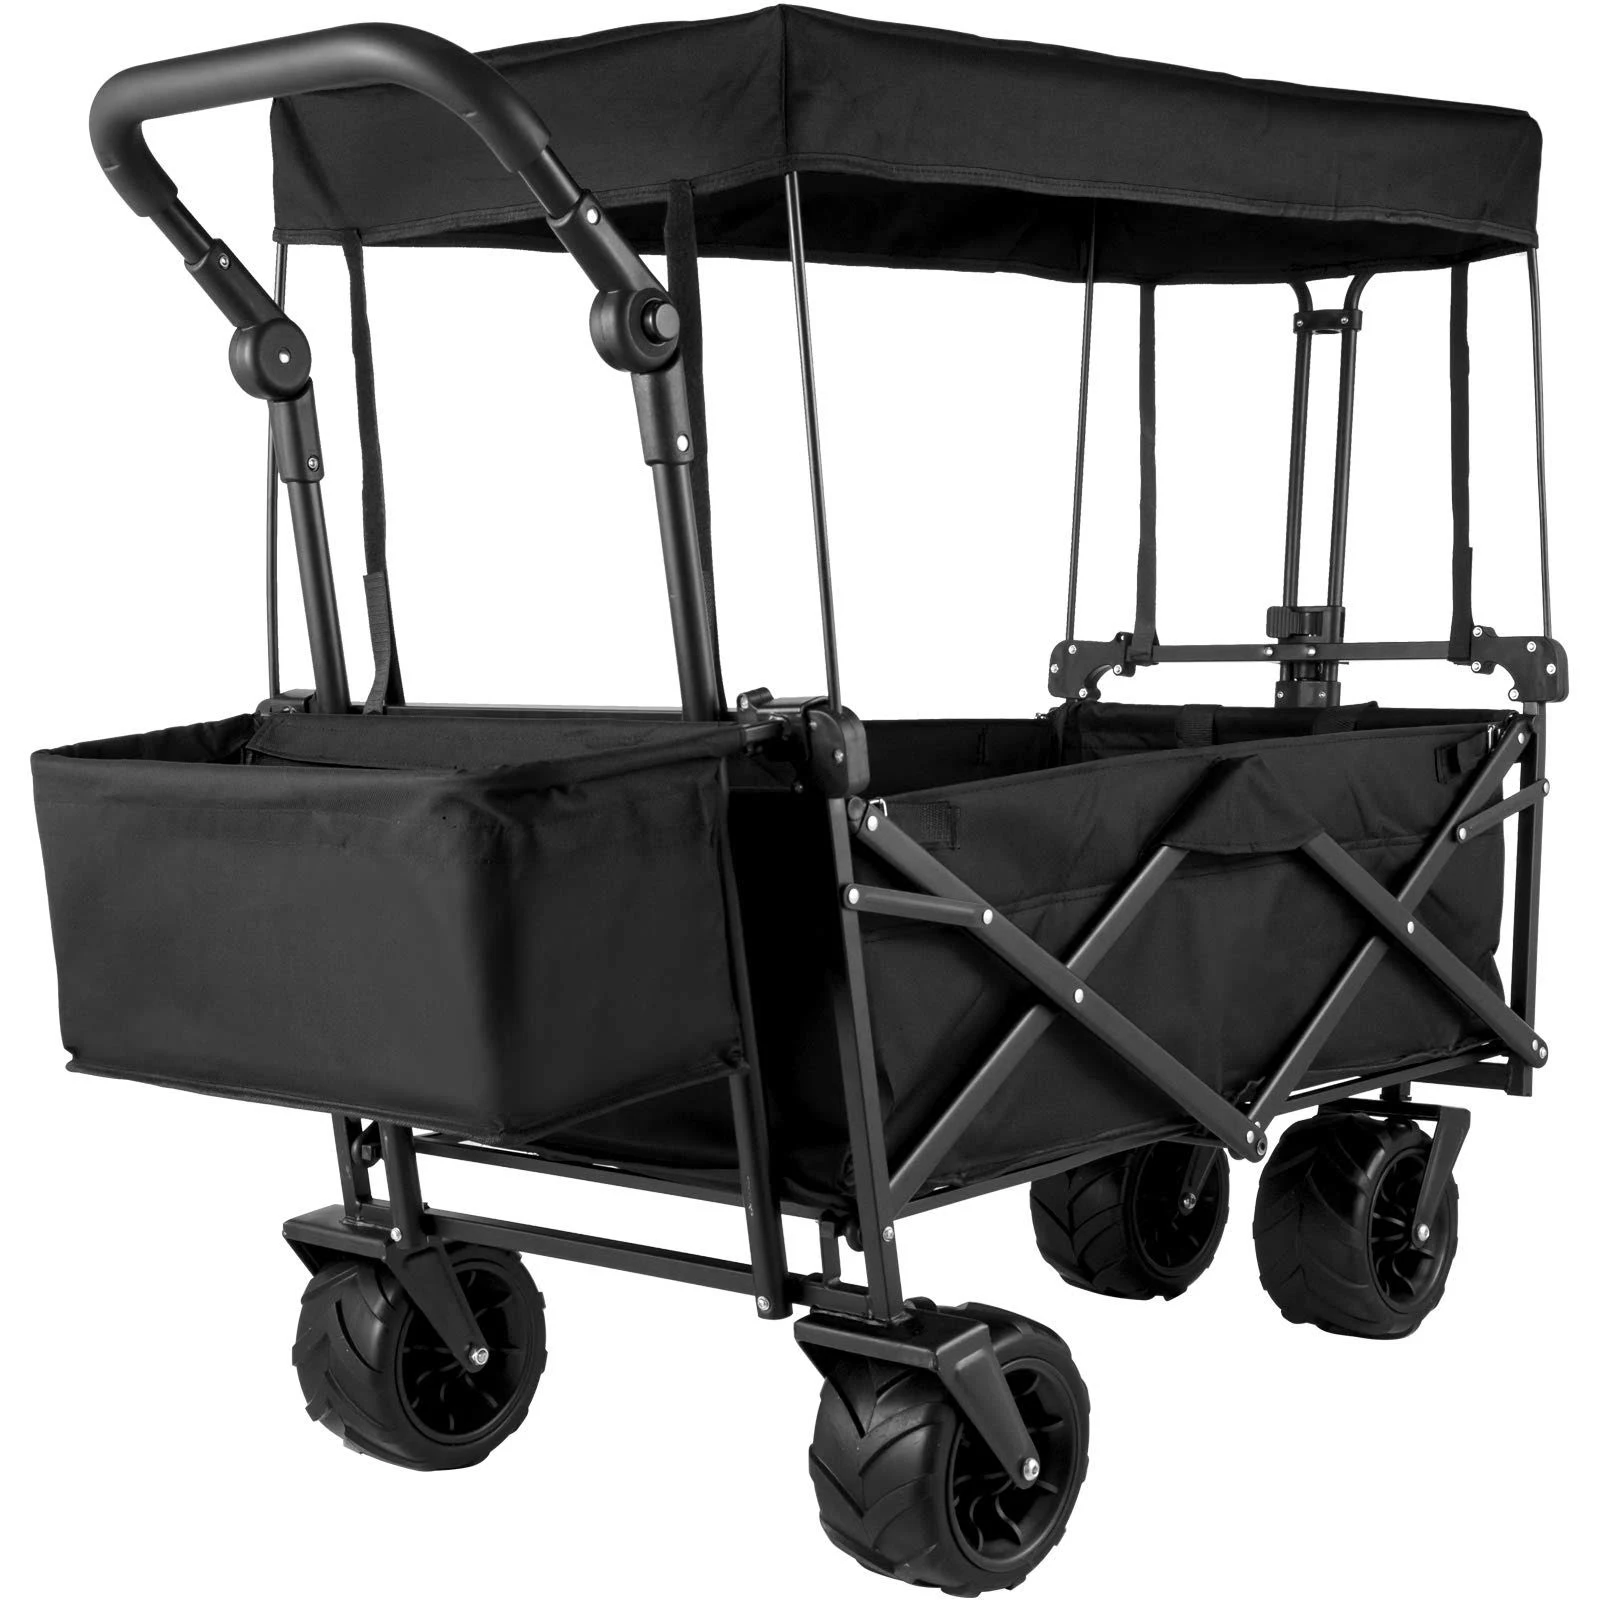 Happbuy Extra Large Collapsible Garden Cart/Wagon with Removable Canopy 702459